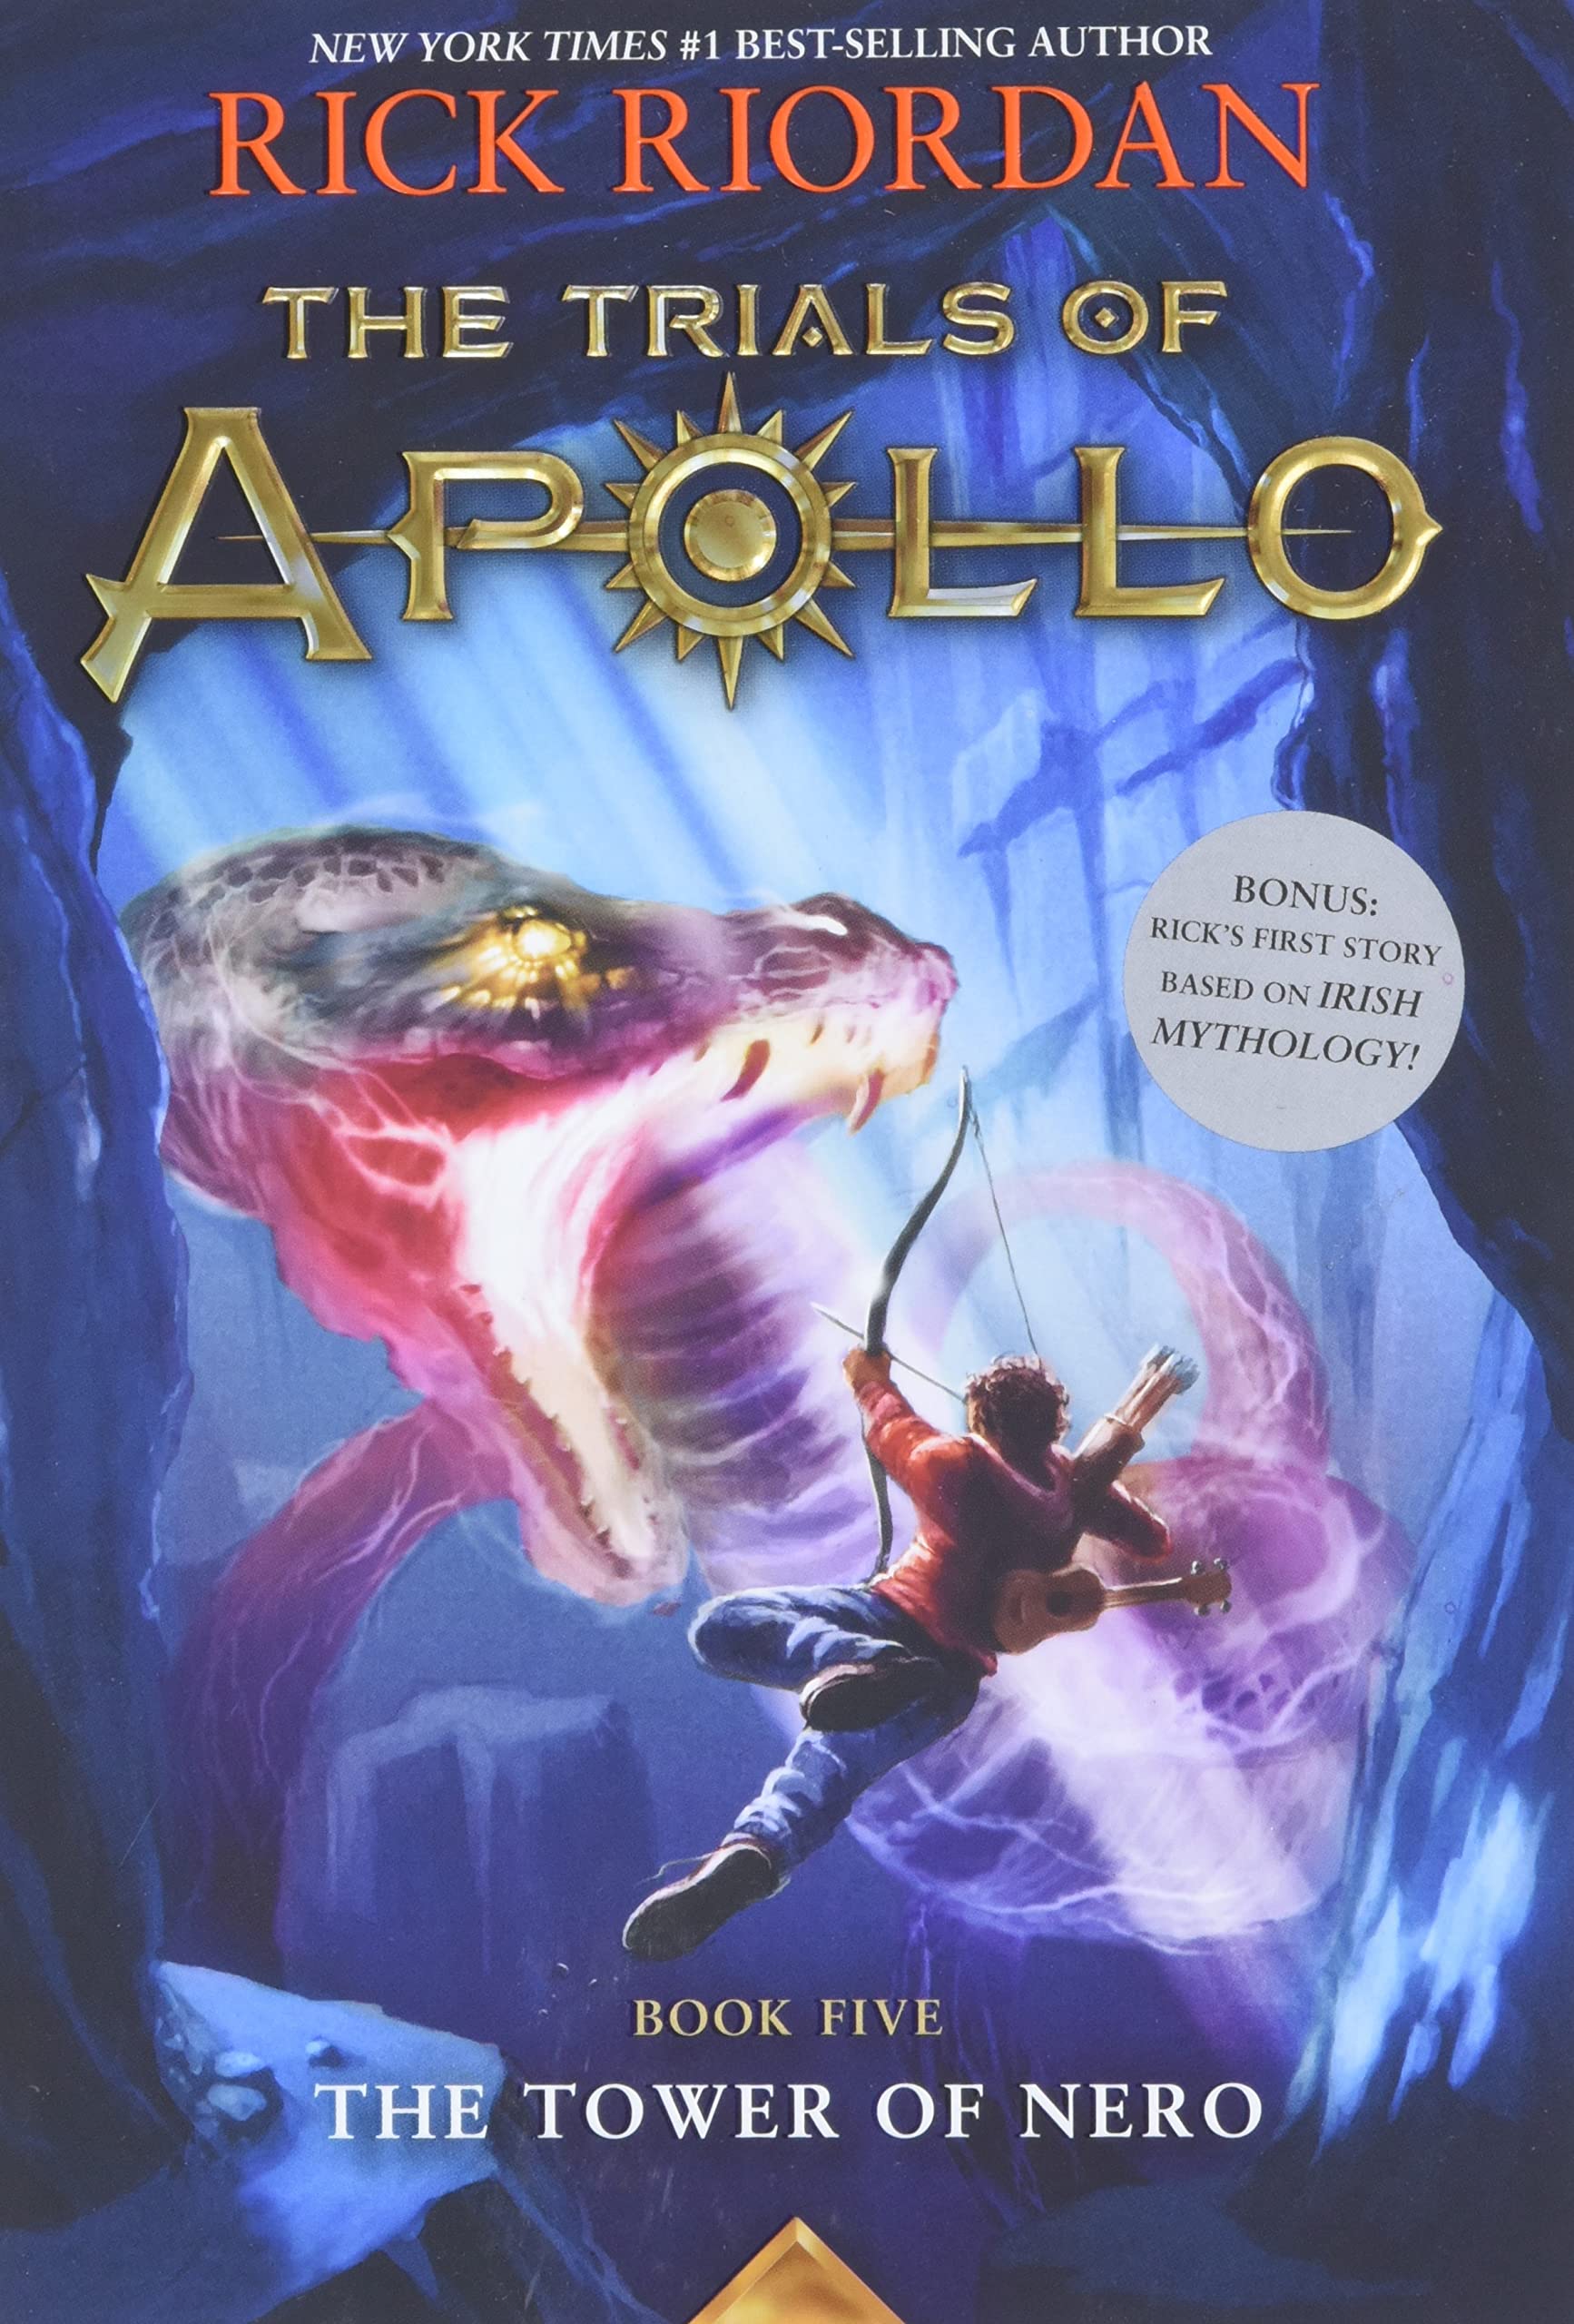 The Trials of Apollo: The tower of Nero (Inglese language, 2020, Disney, Hyperion)